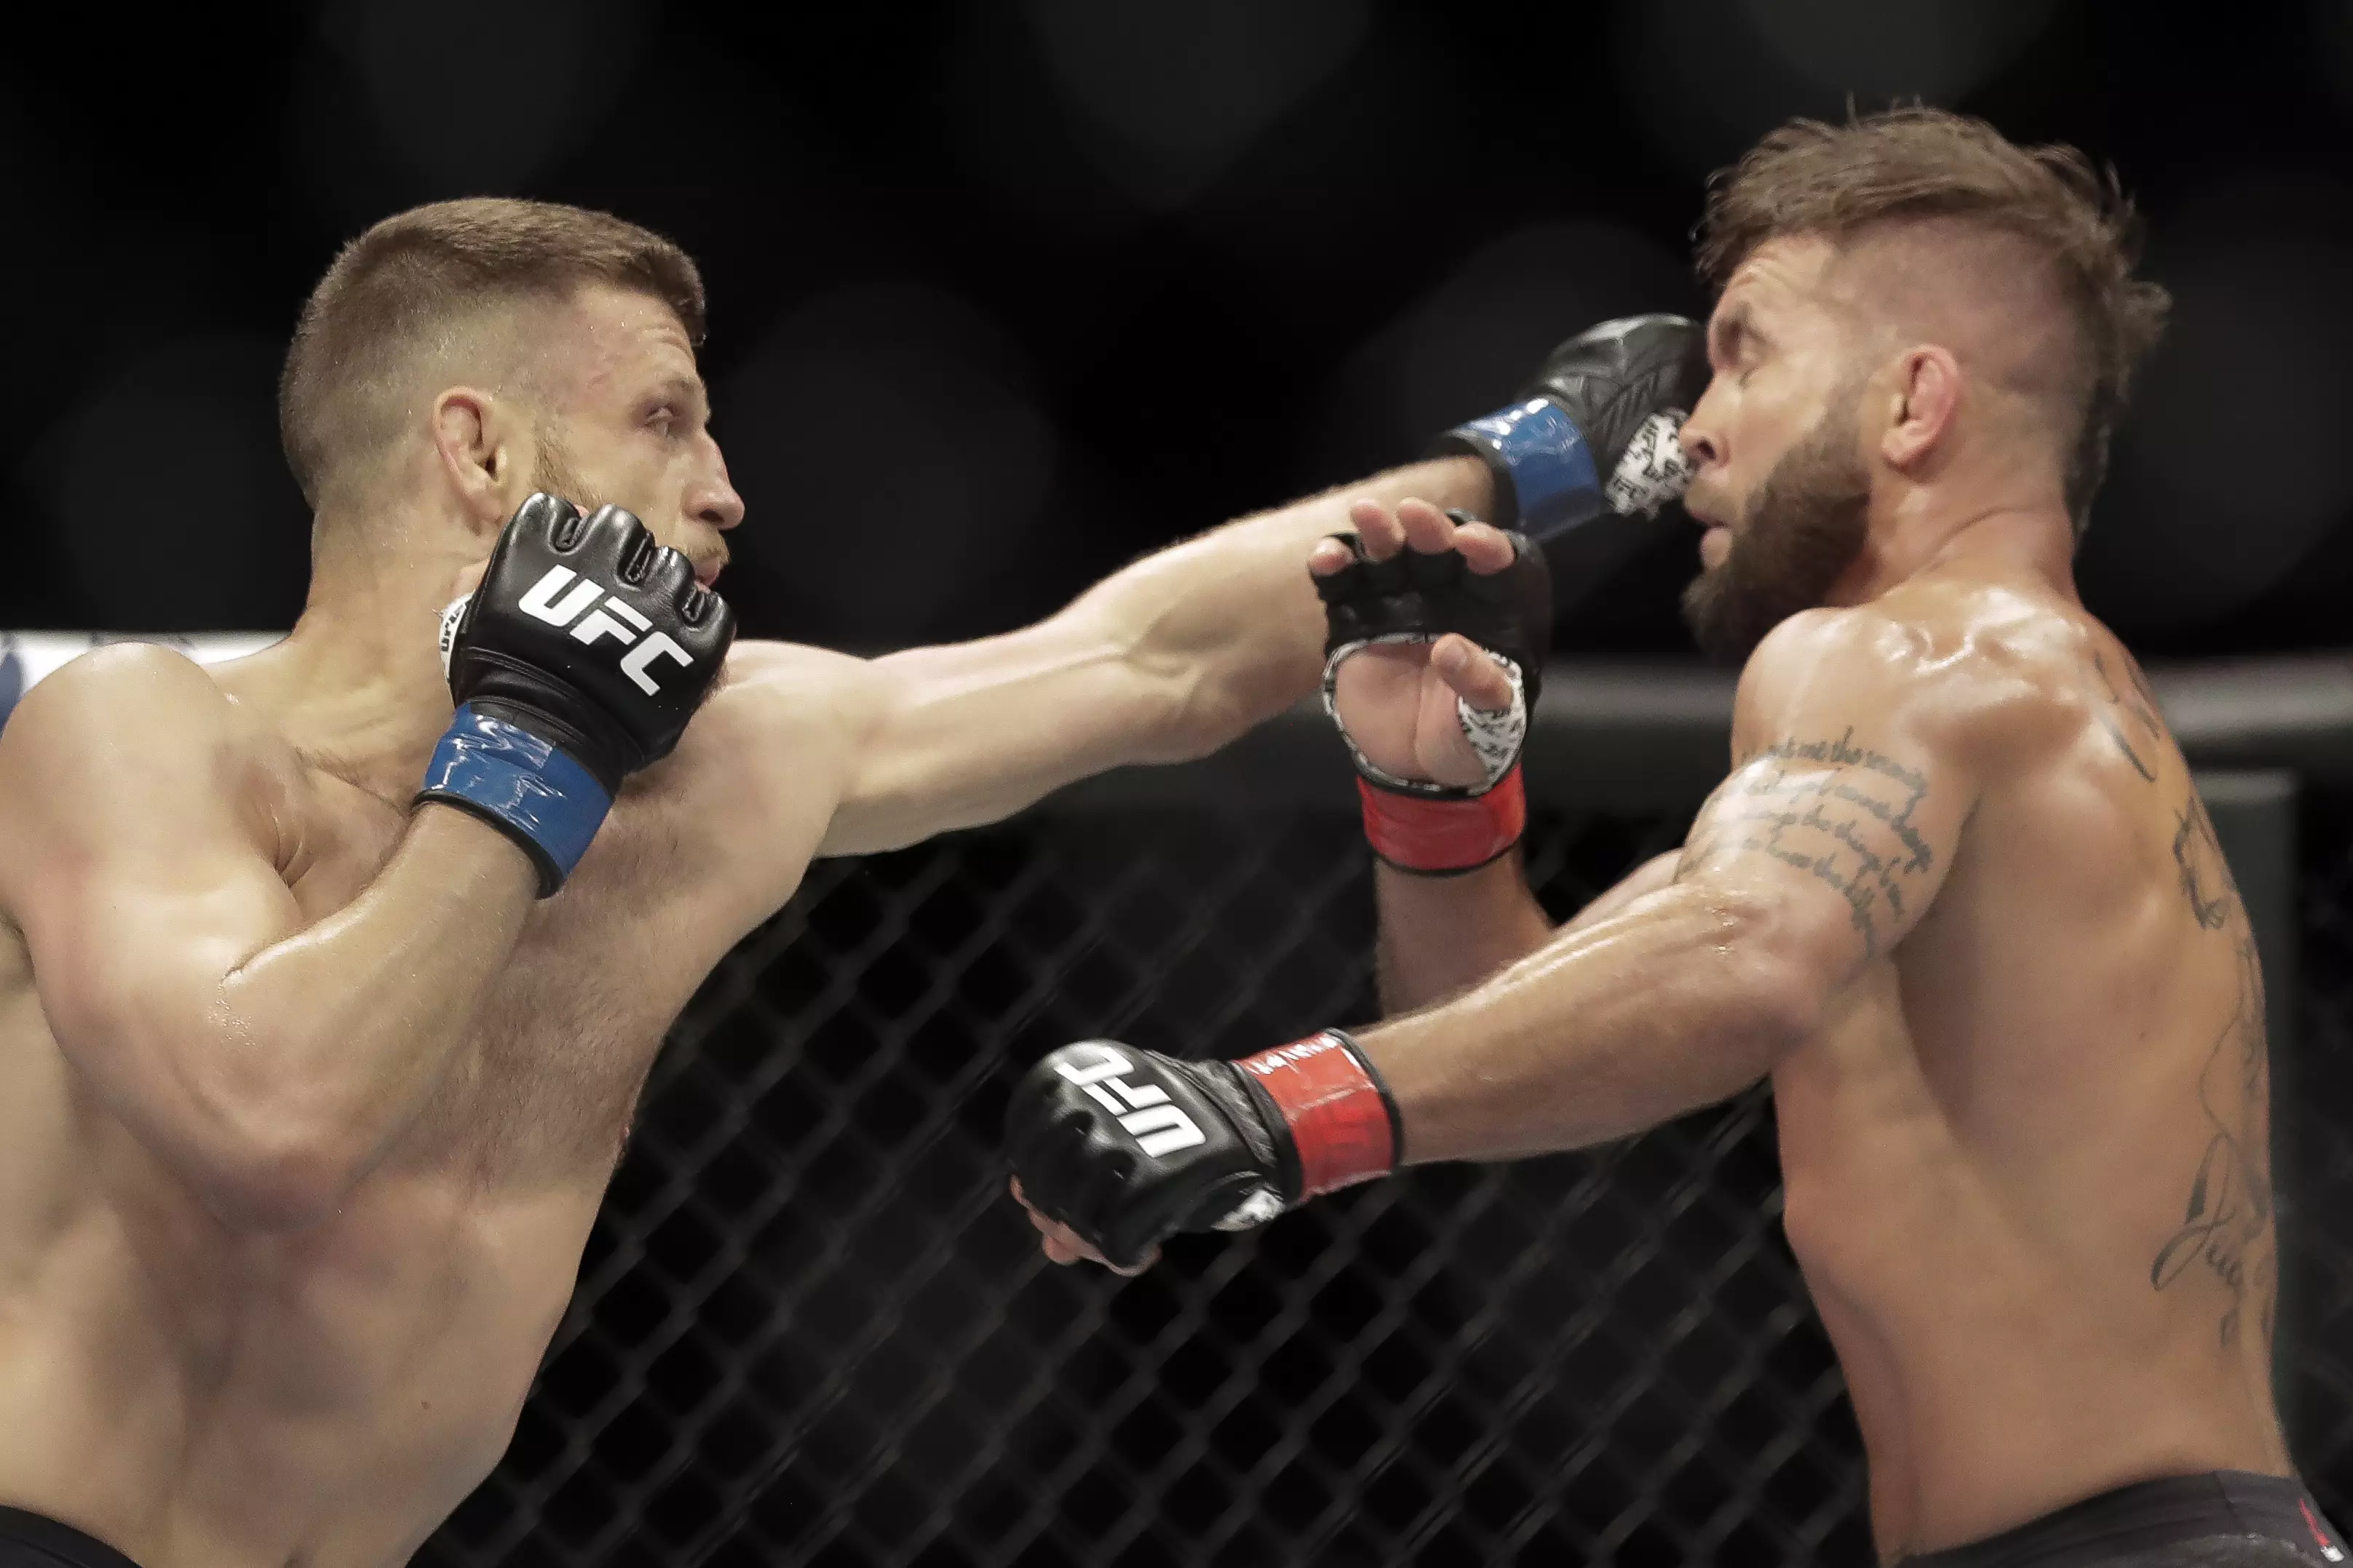 Calvin Kattar, left, strikes Jeremy Stephens, right, during their bout. (Image